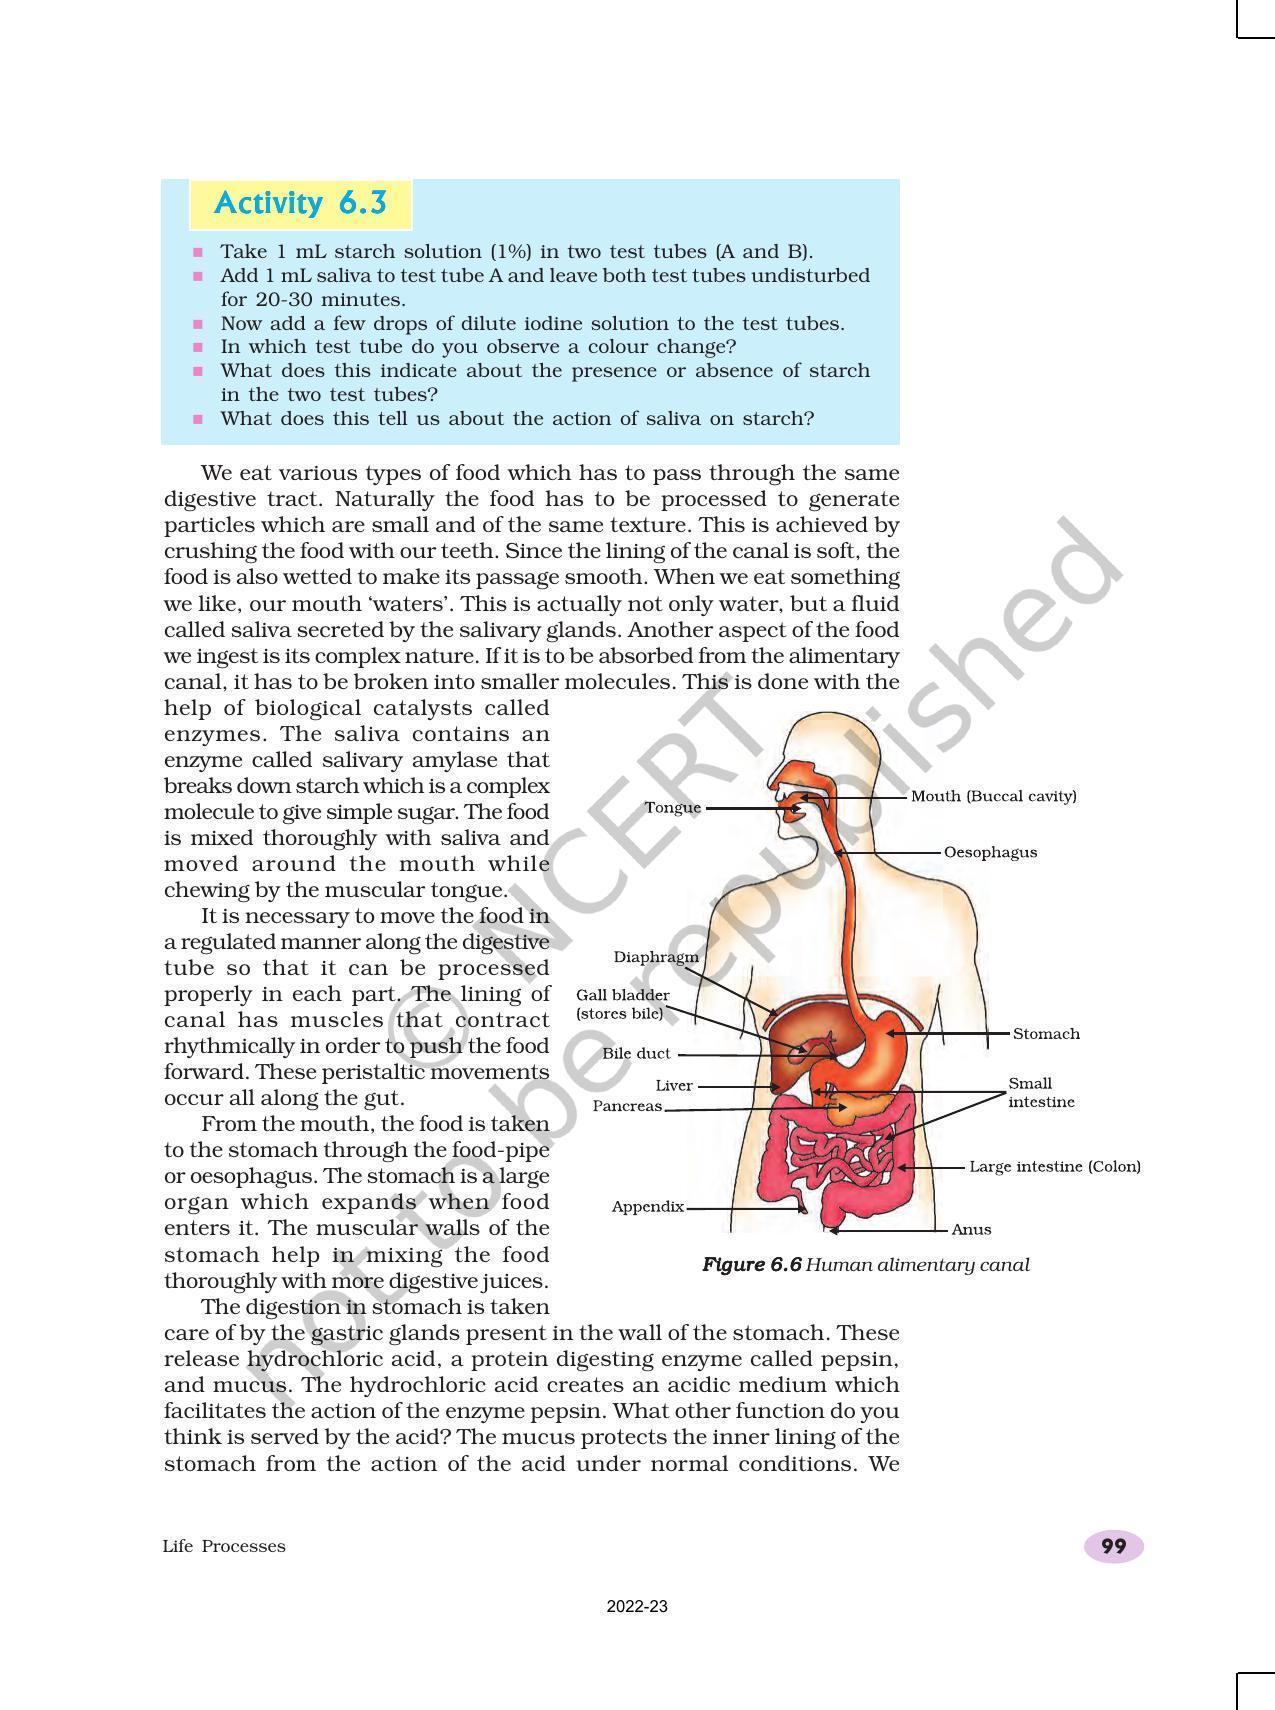 NCERT Book for Class 10 Science Chapter 6 Life Processes - Page 7